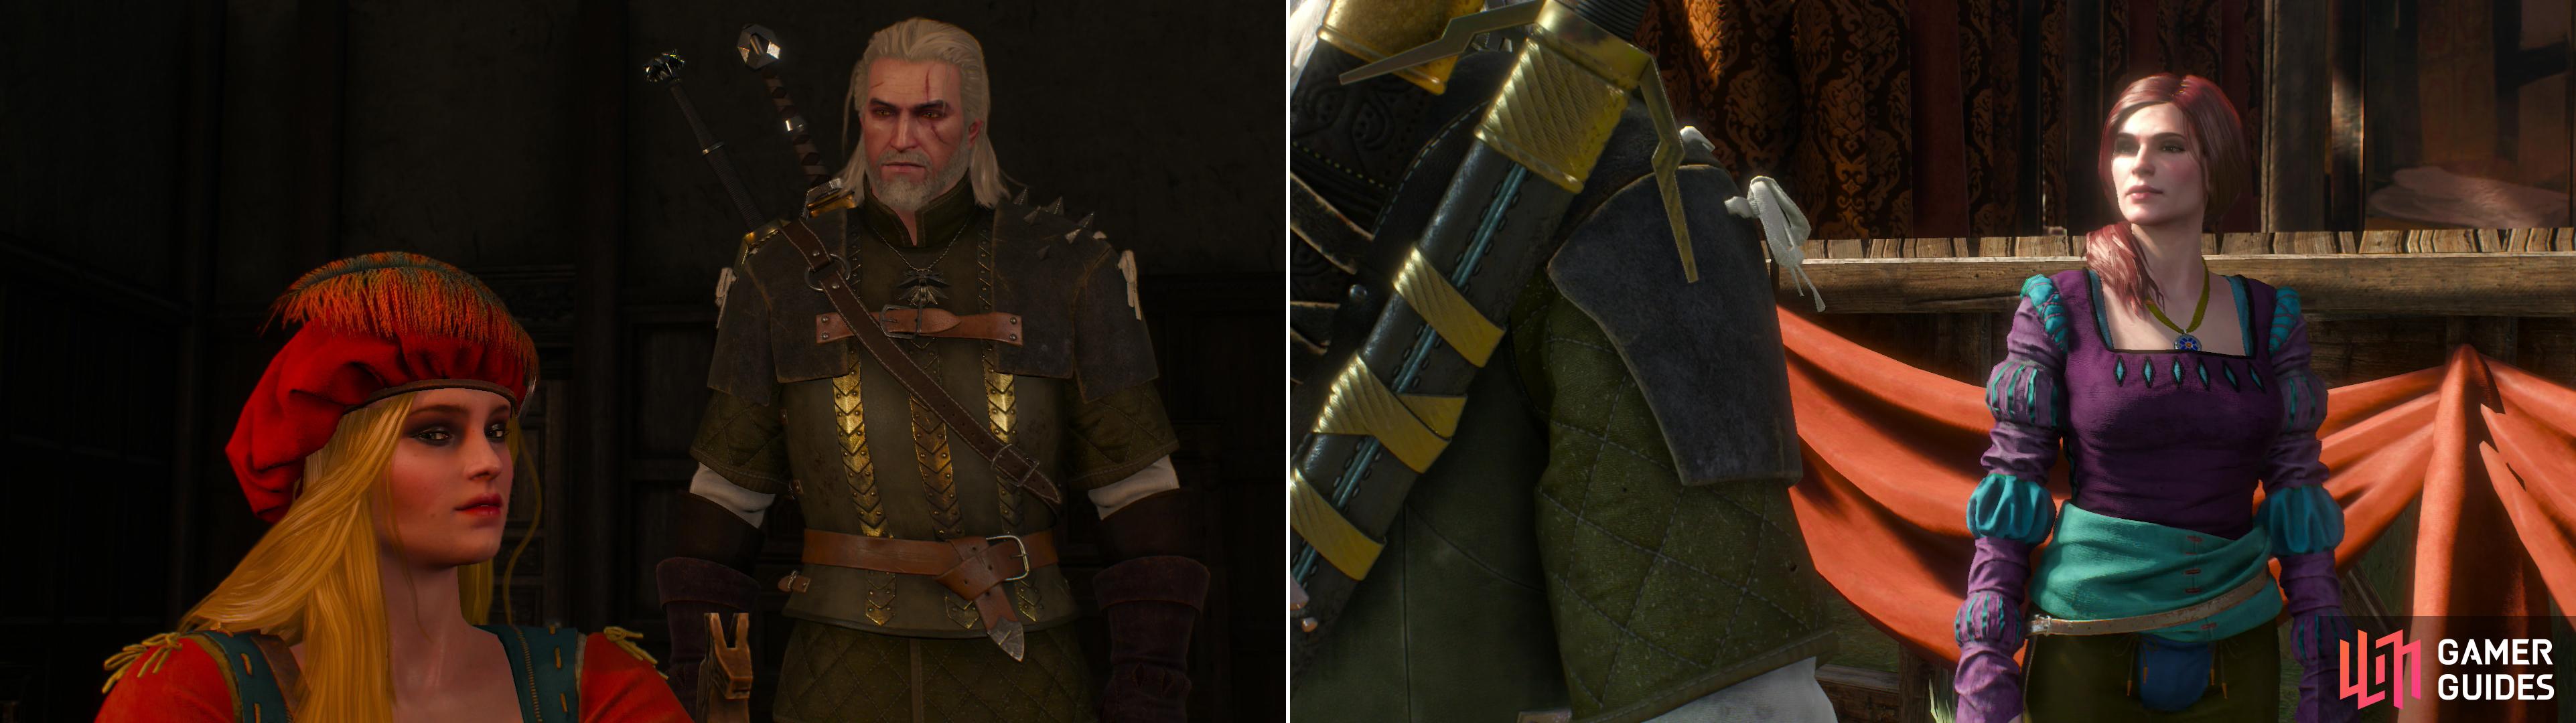 Geralt "helps" Priscilla write a play (left) then heads off to hire Irina's acting troupe (right).